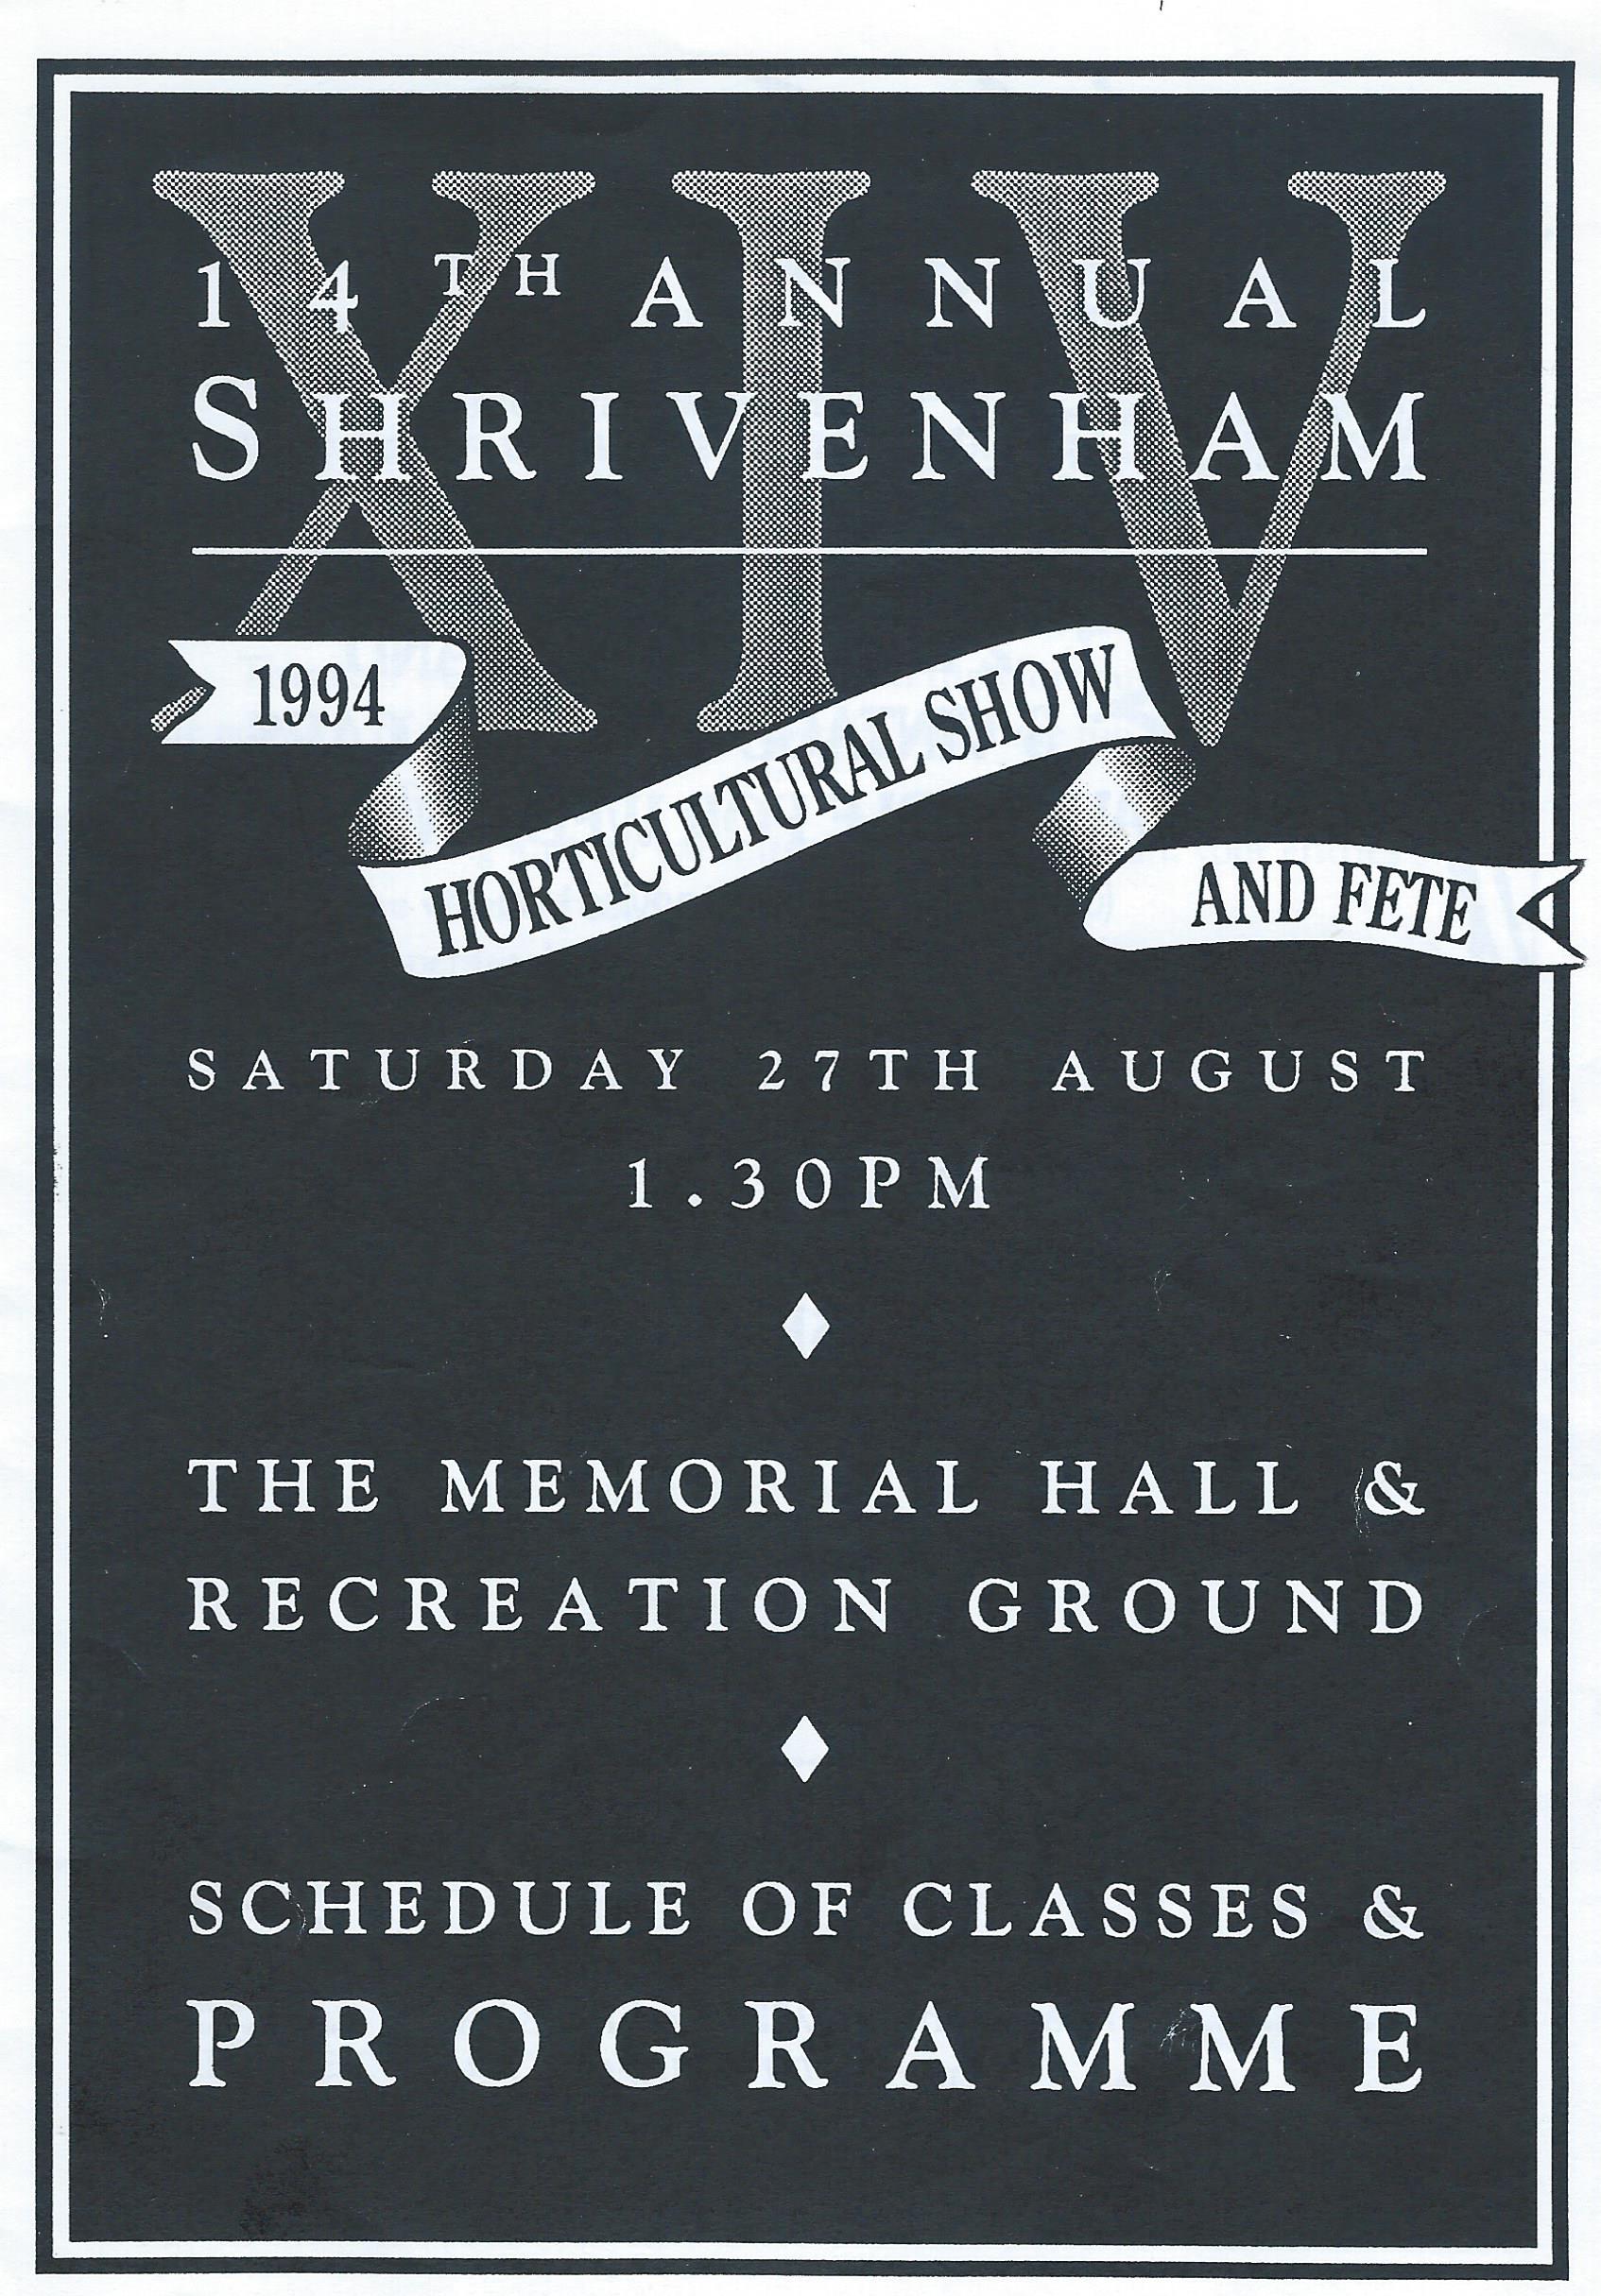 Programme front cover